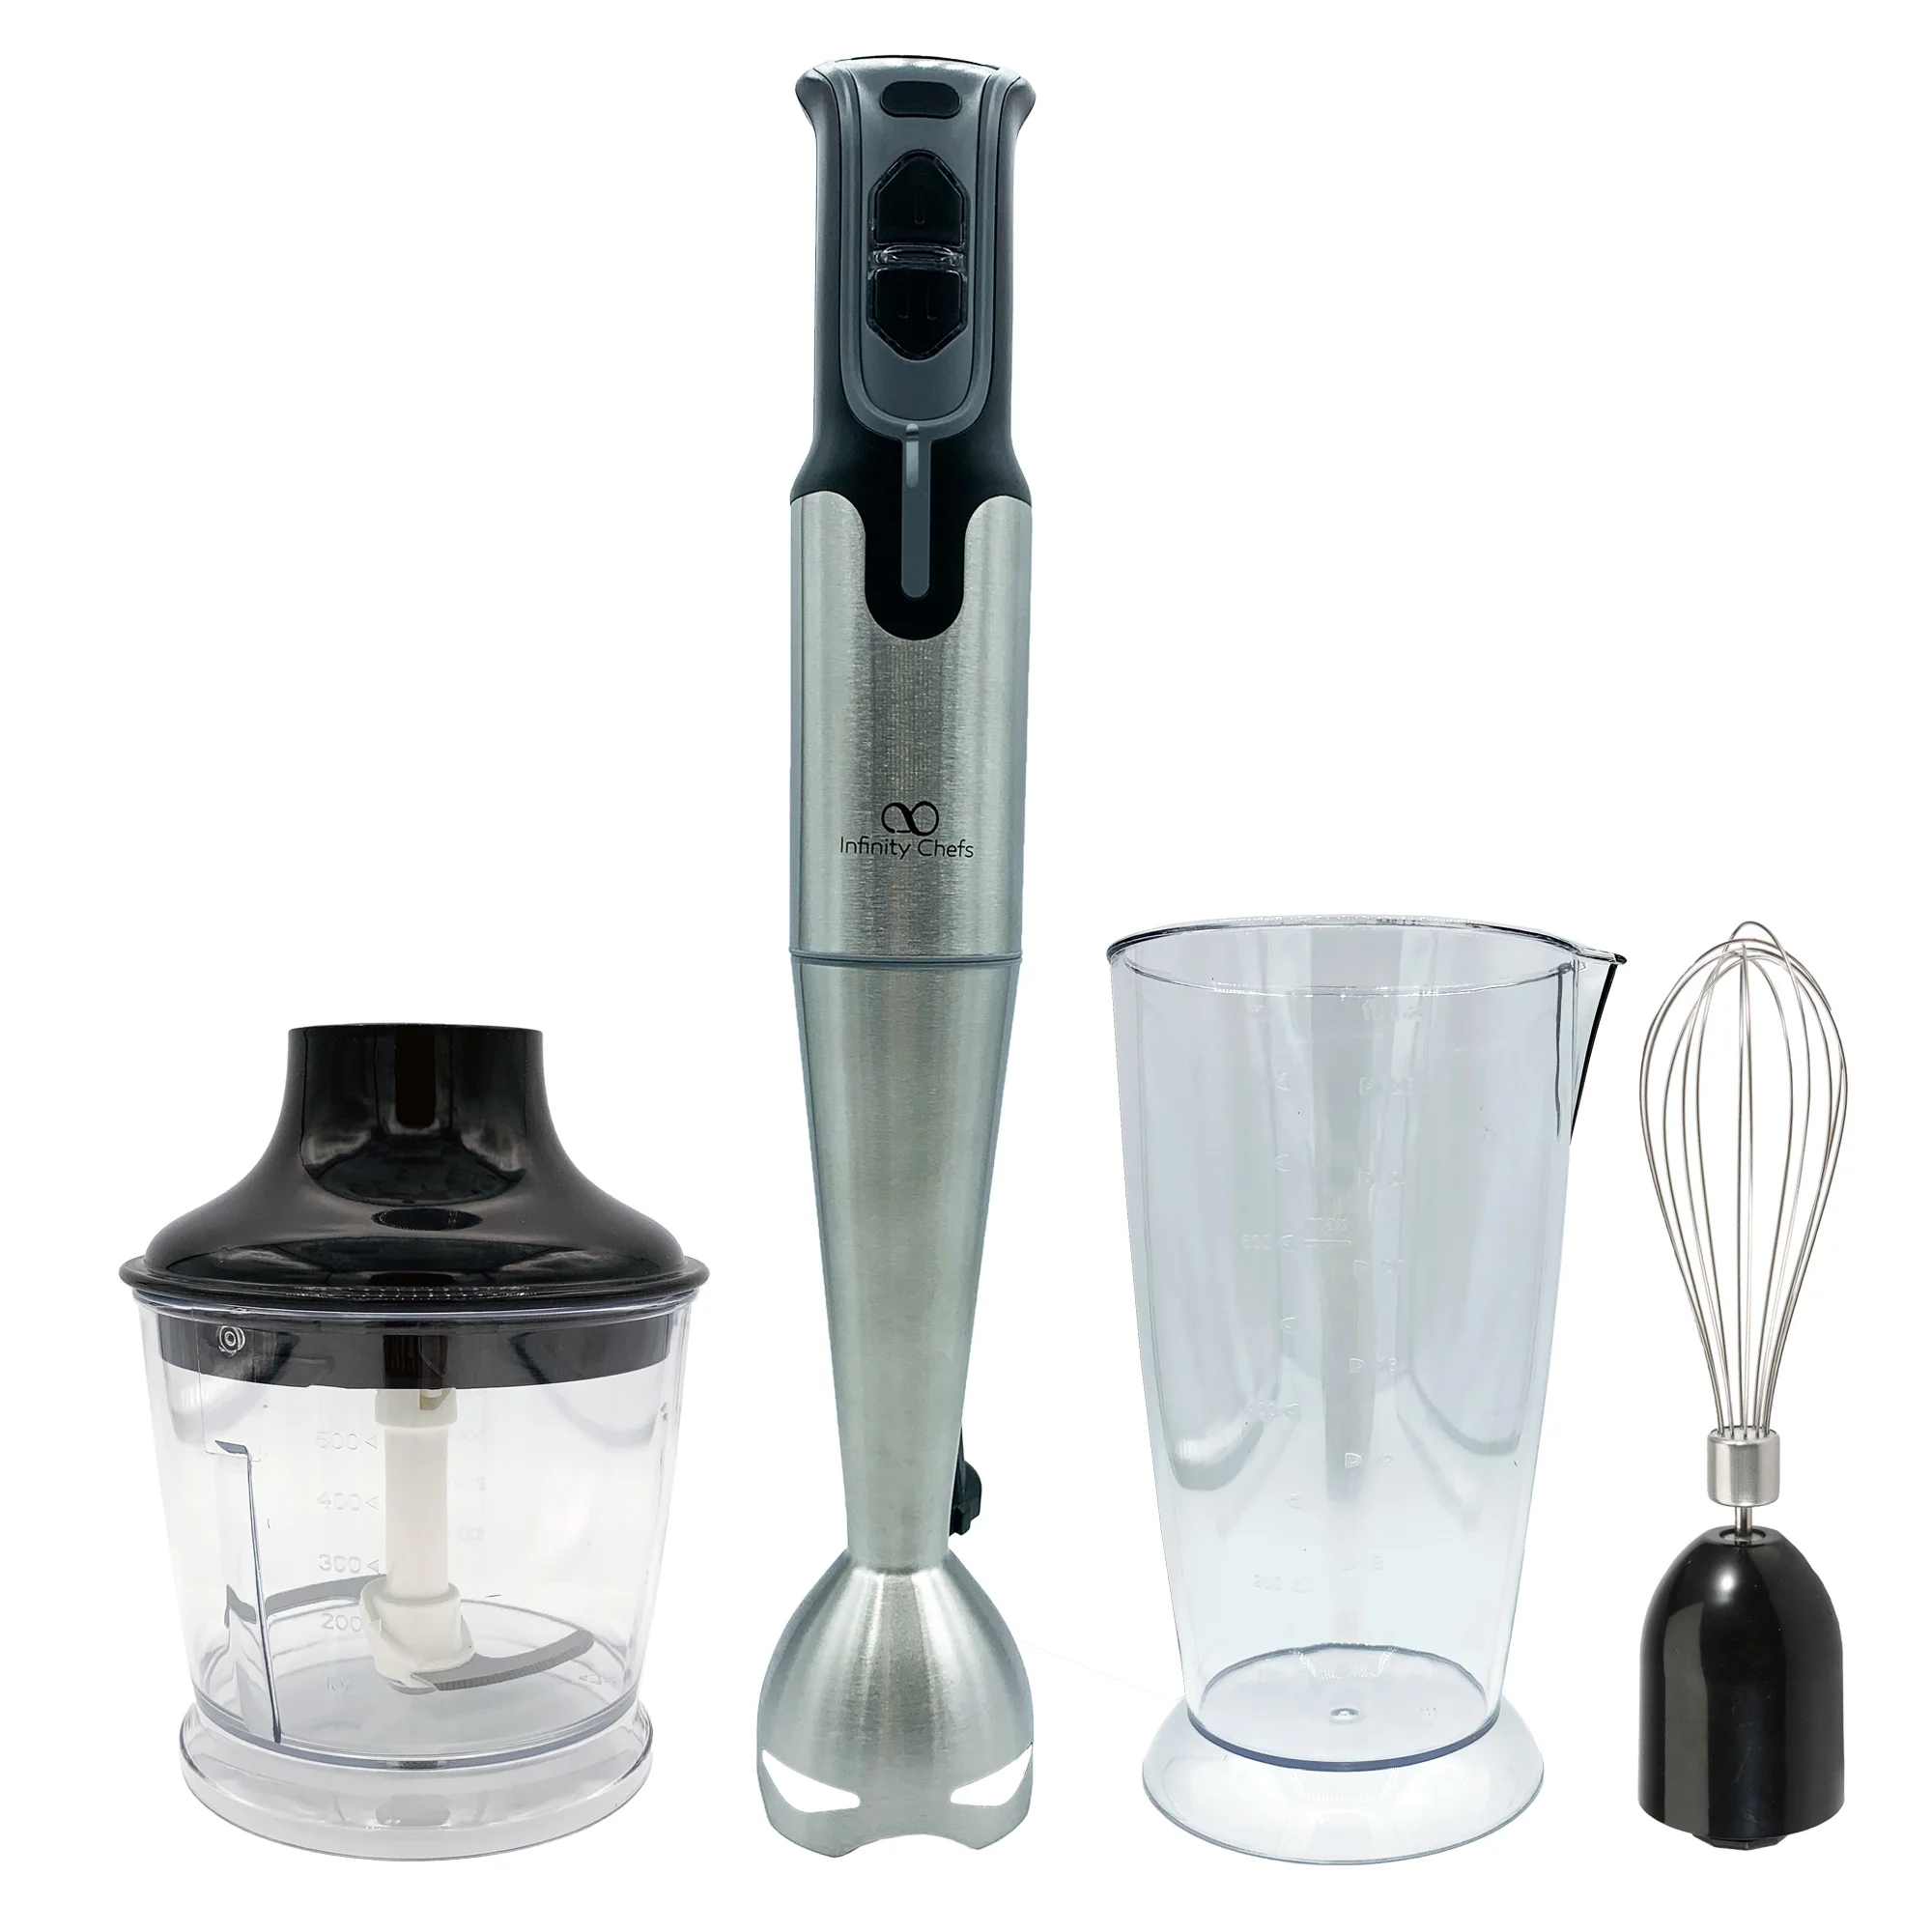 https://ae01.alicdn.com/kf/U05b02440e15a4b1b9af3888ea675ff24A/BERGNER-700w-blender-picker-Set-in-stainless-steel-with-Infinity-Chefs-collection-accessories.jpg